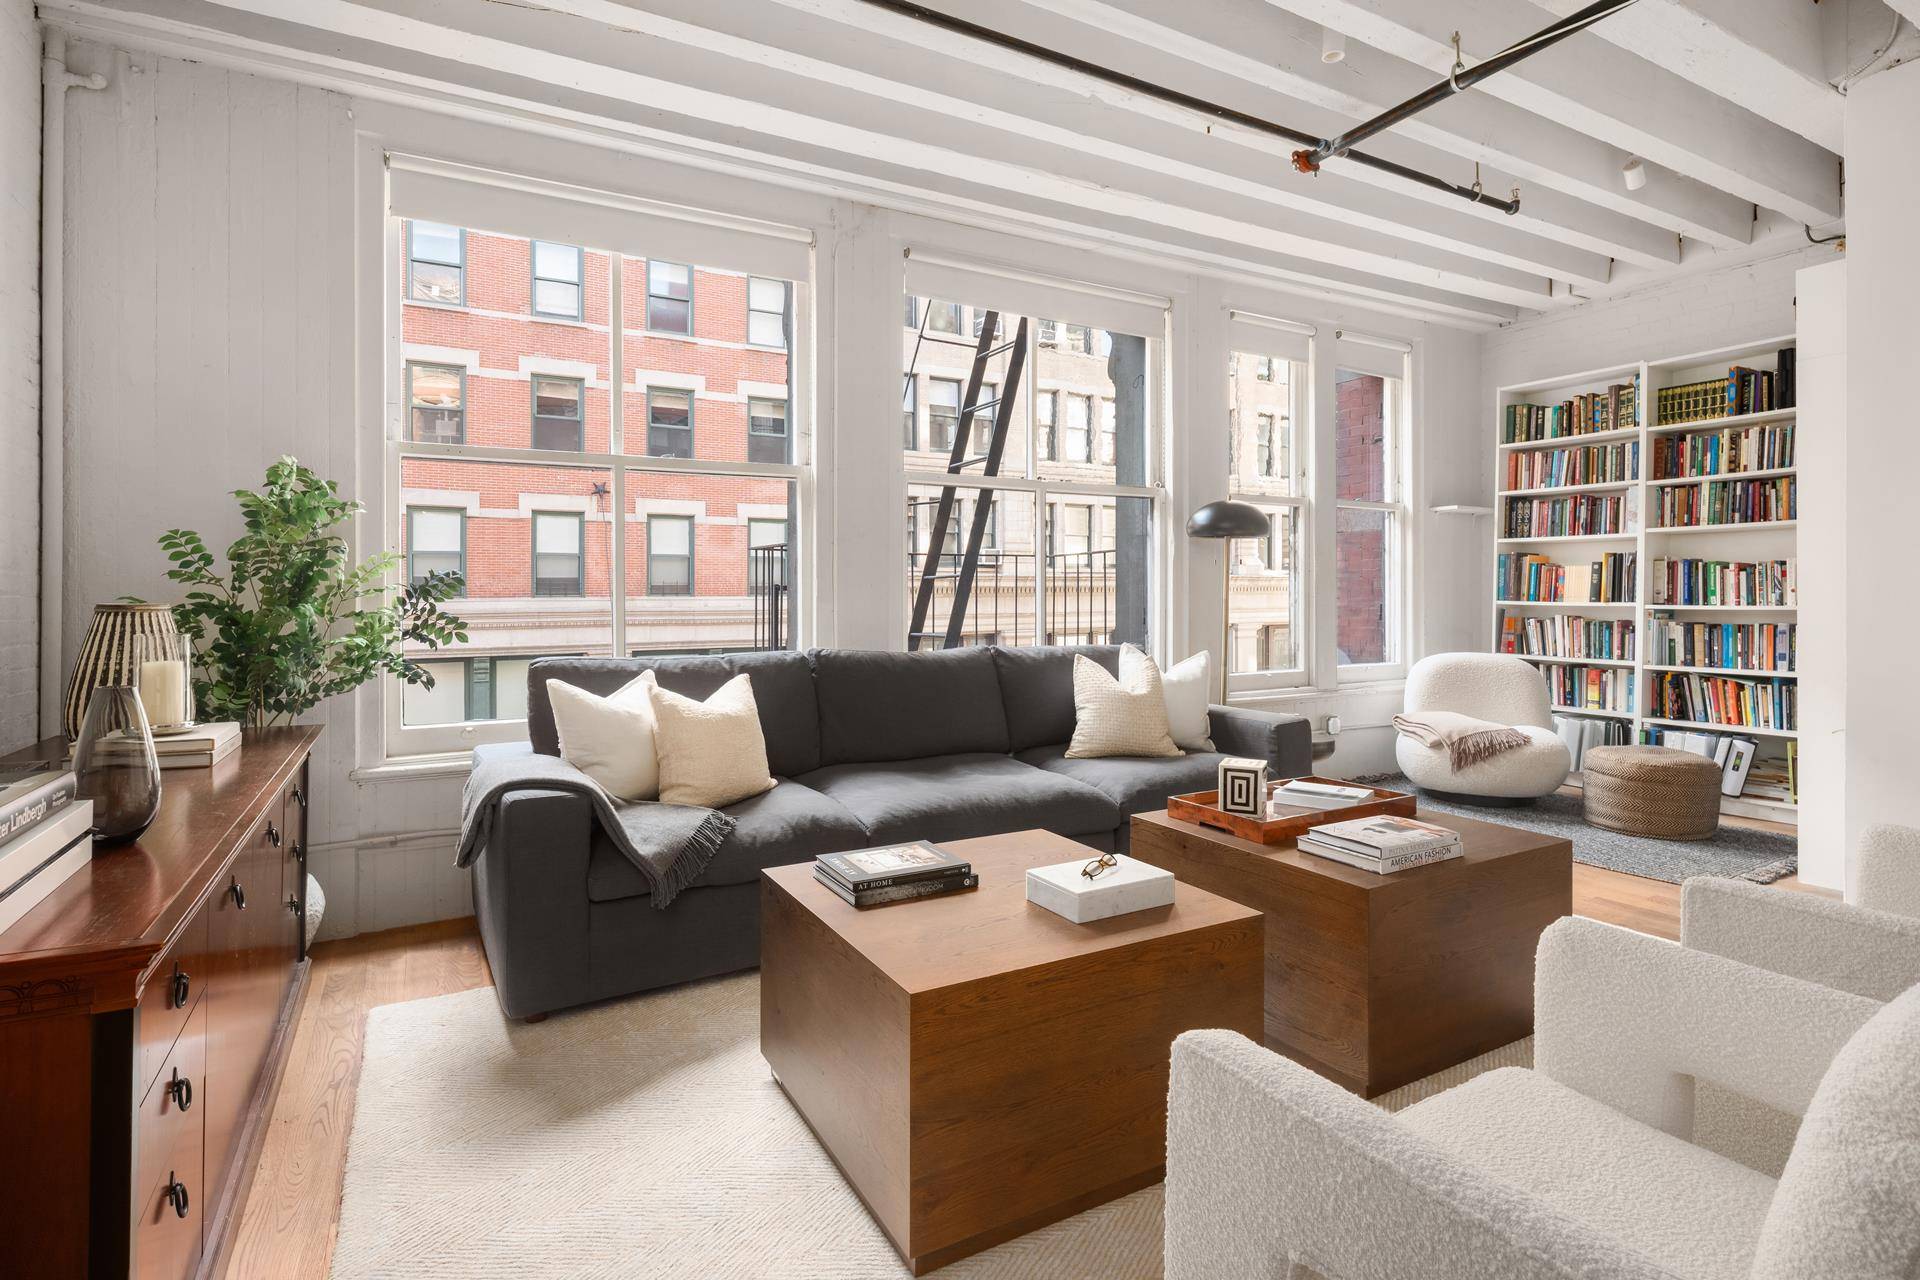 Welcome home to Apt 3 in 158 Franklin, a 2 bed 2 bath with den in a boutique loft building in prime Tribeca !